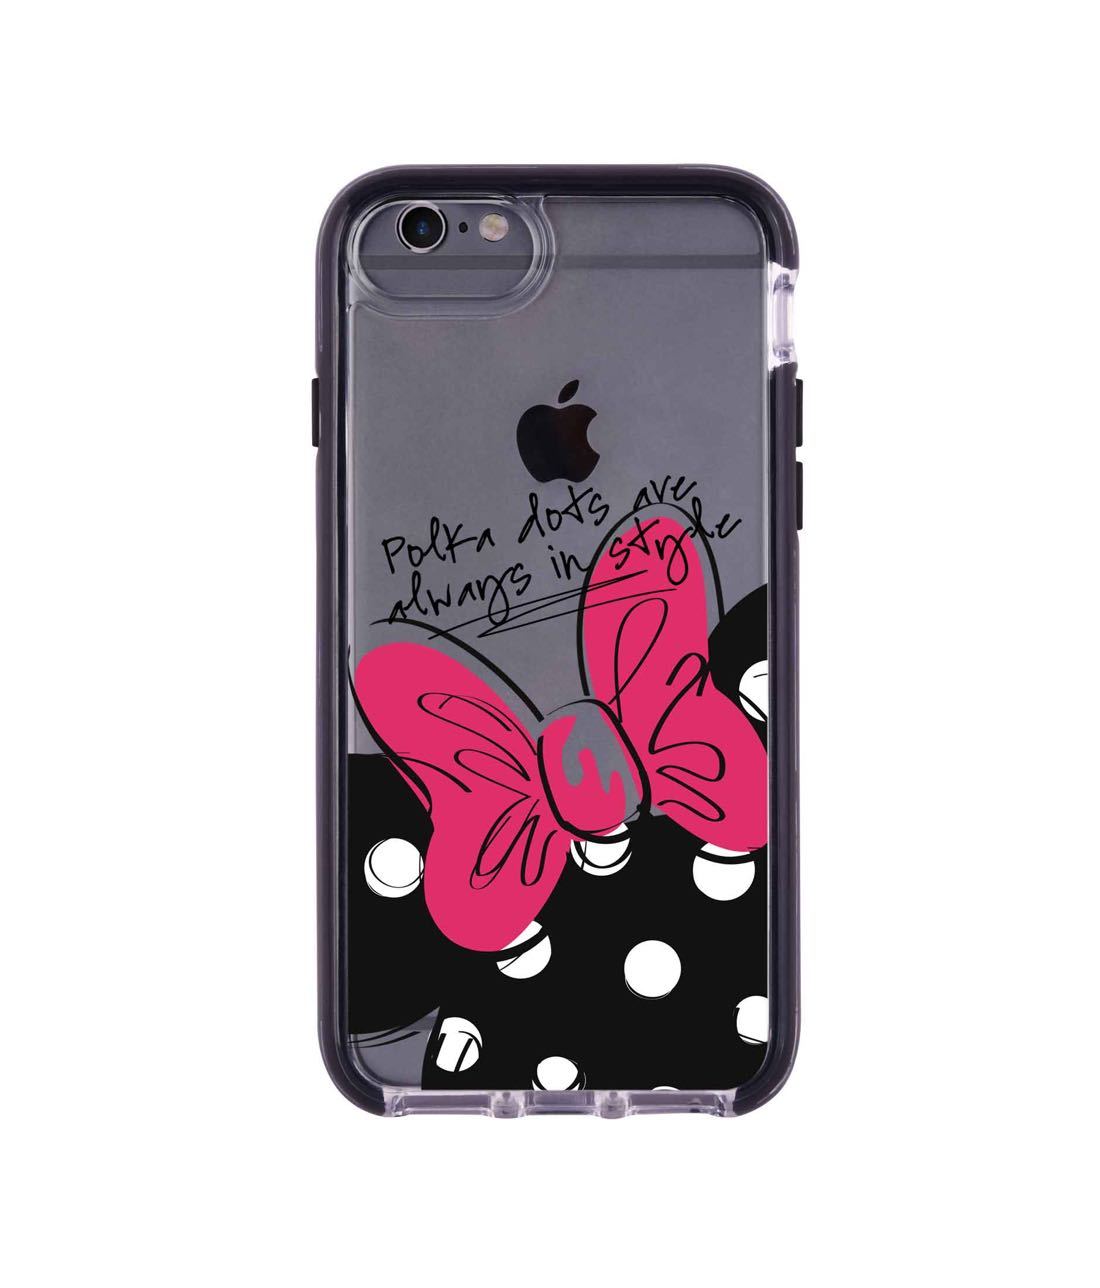 Polka Minnie - Extreme Phone Case for iPhone 6 Plus